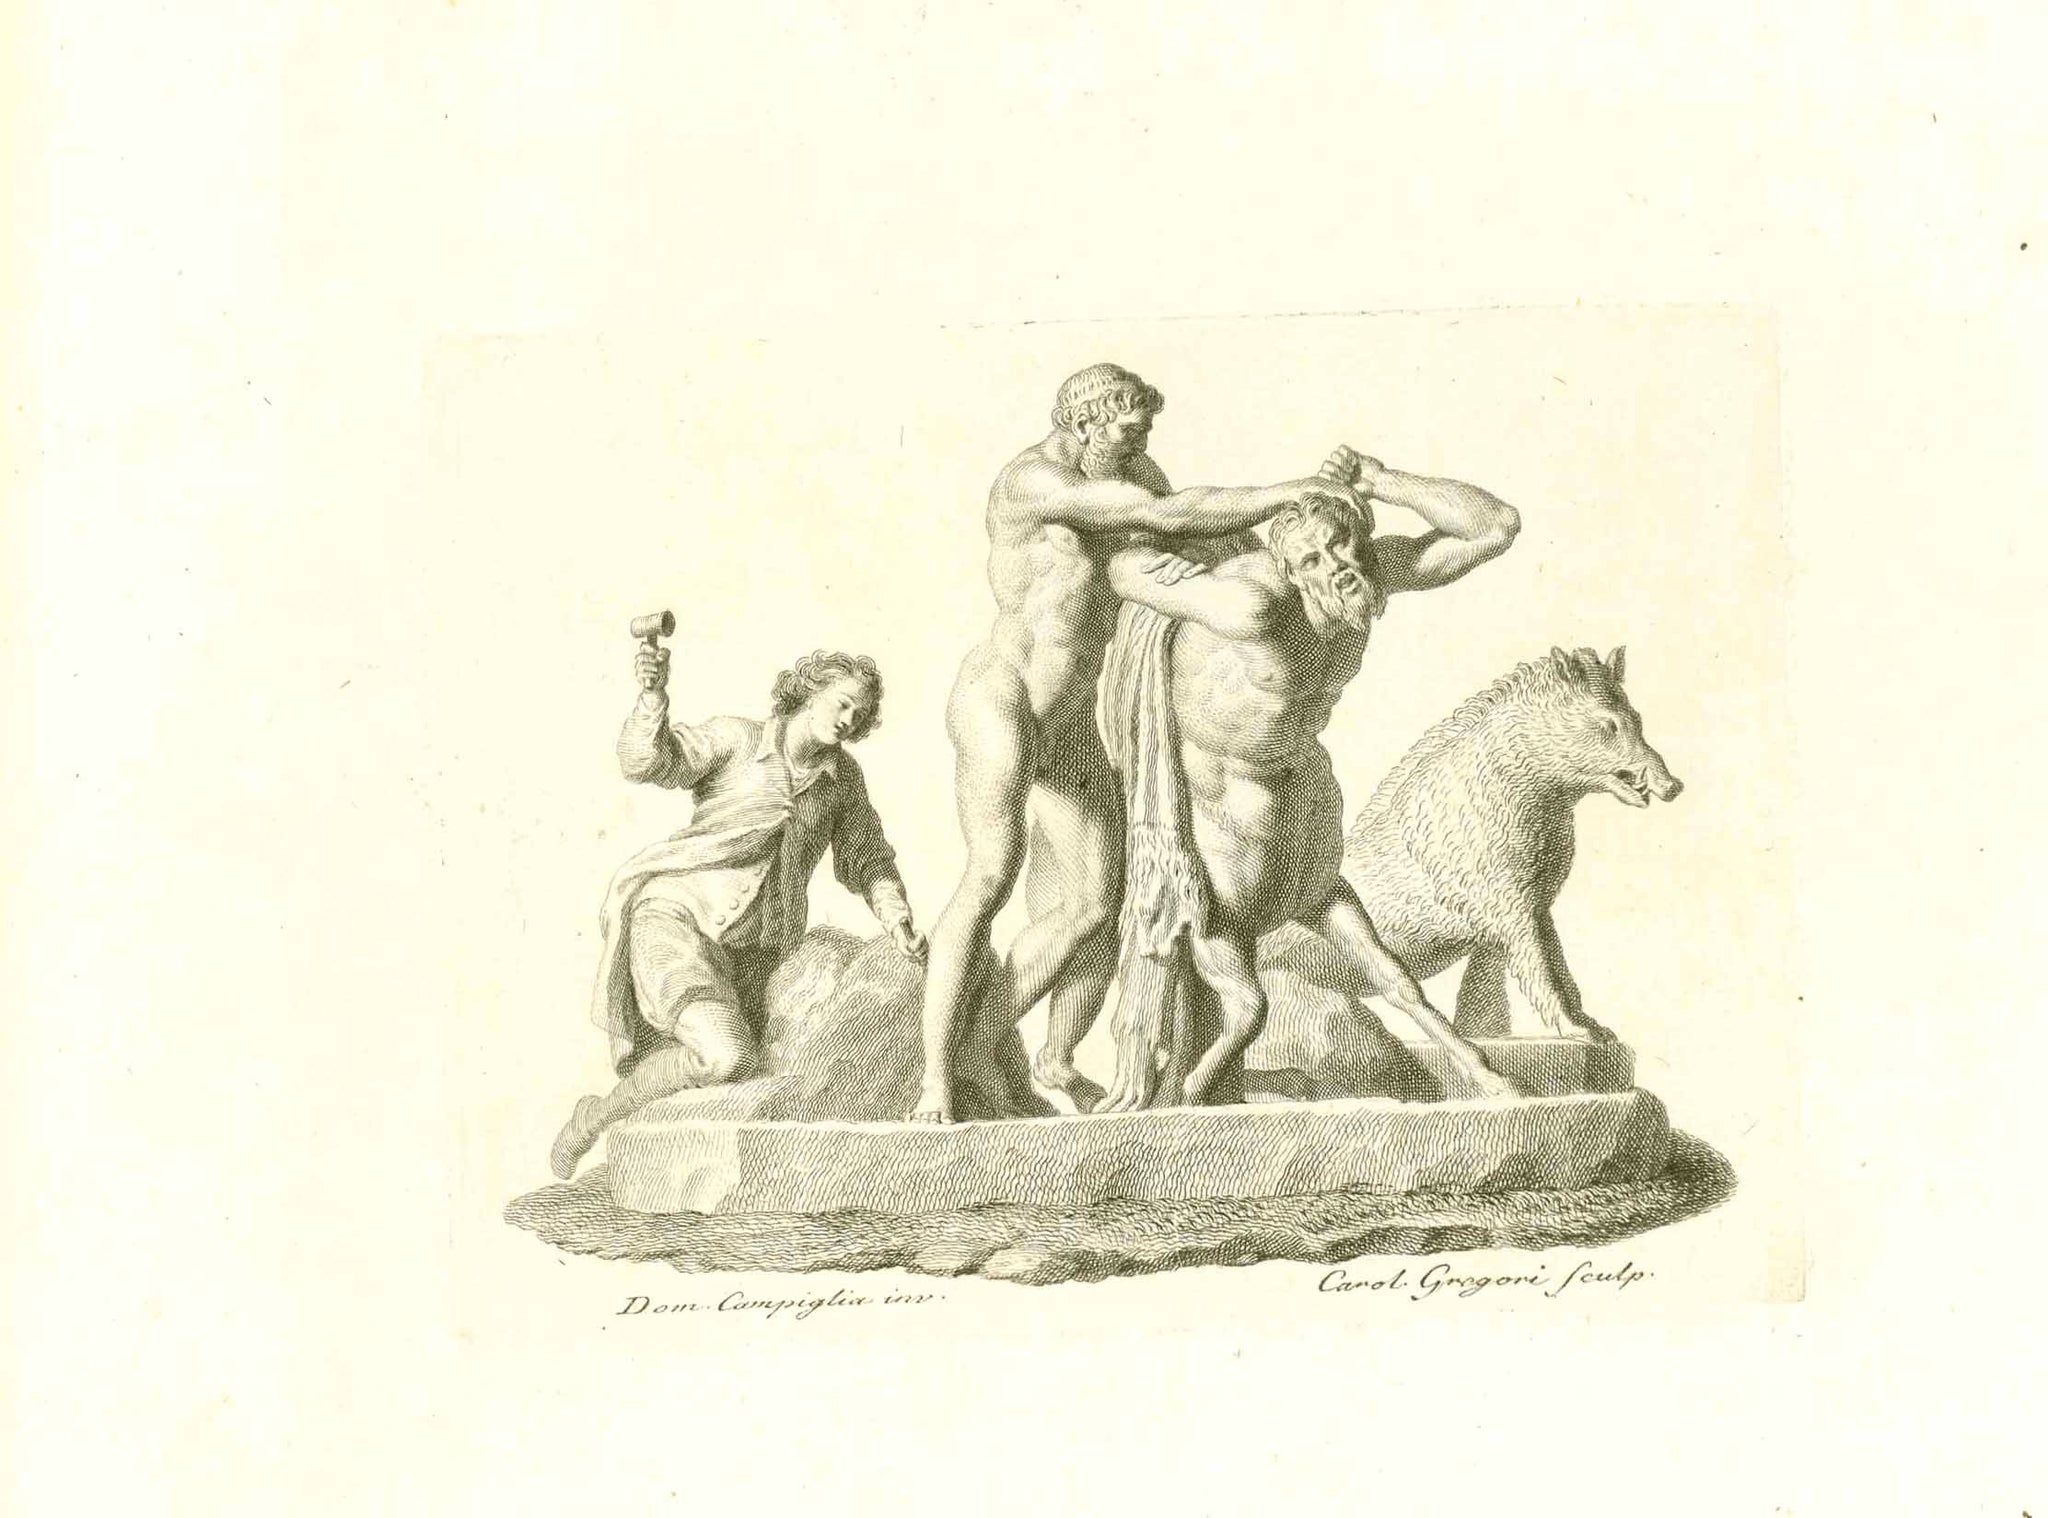 Original Antique mythological print, No title: Sculpturer working on a statue Heracles killing the centaur Nessus.  Copper engraving by Carol Gregory after Domenico Campiglia  Original antique print  